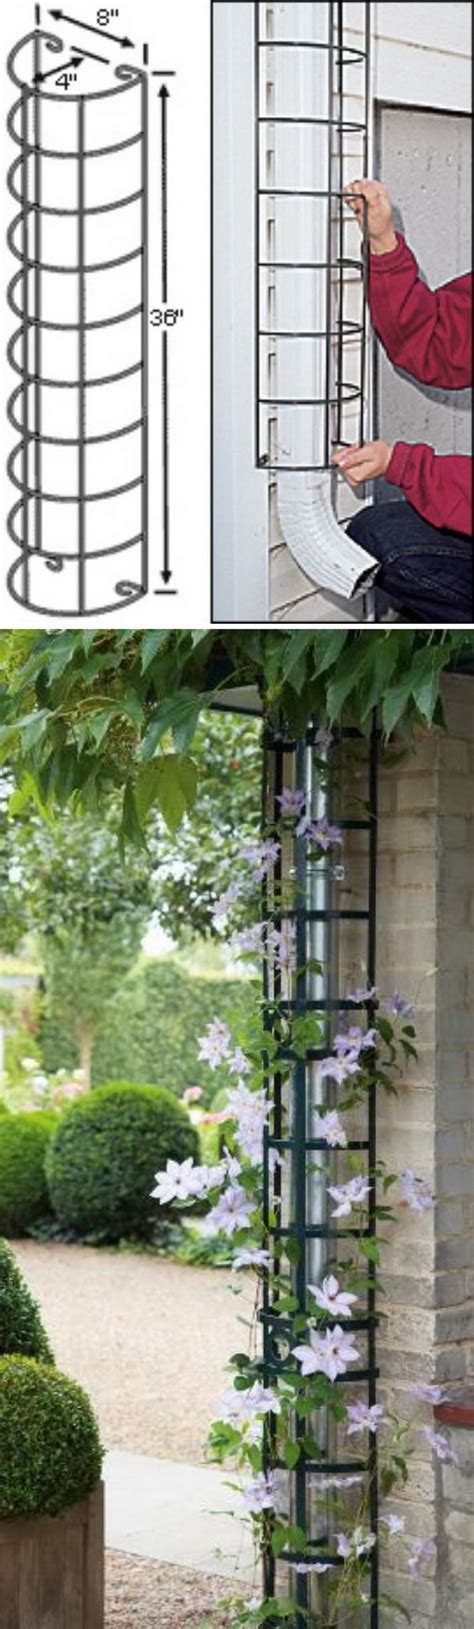 Looking for arbor or trellis ideas for your garden? 20+ Awesome DIY Garden Trellis Projects - Hative